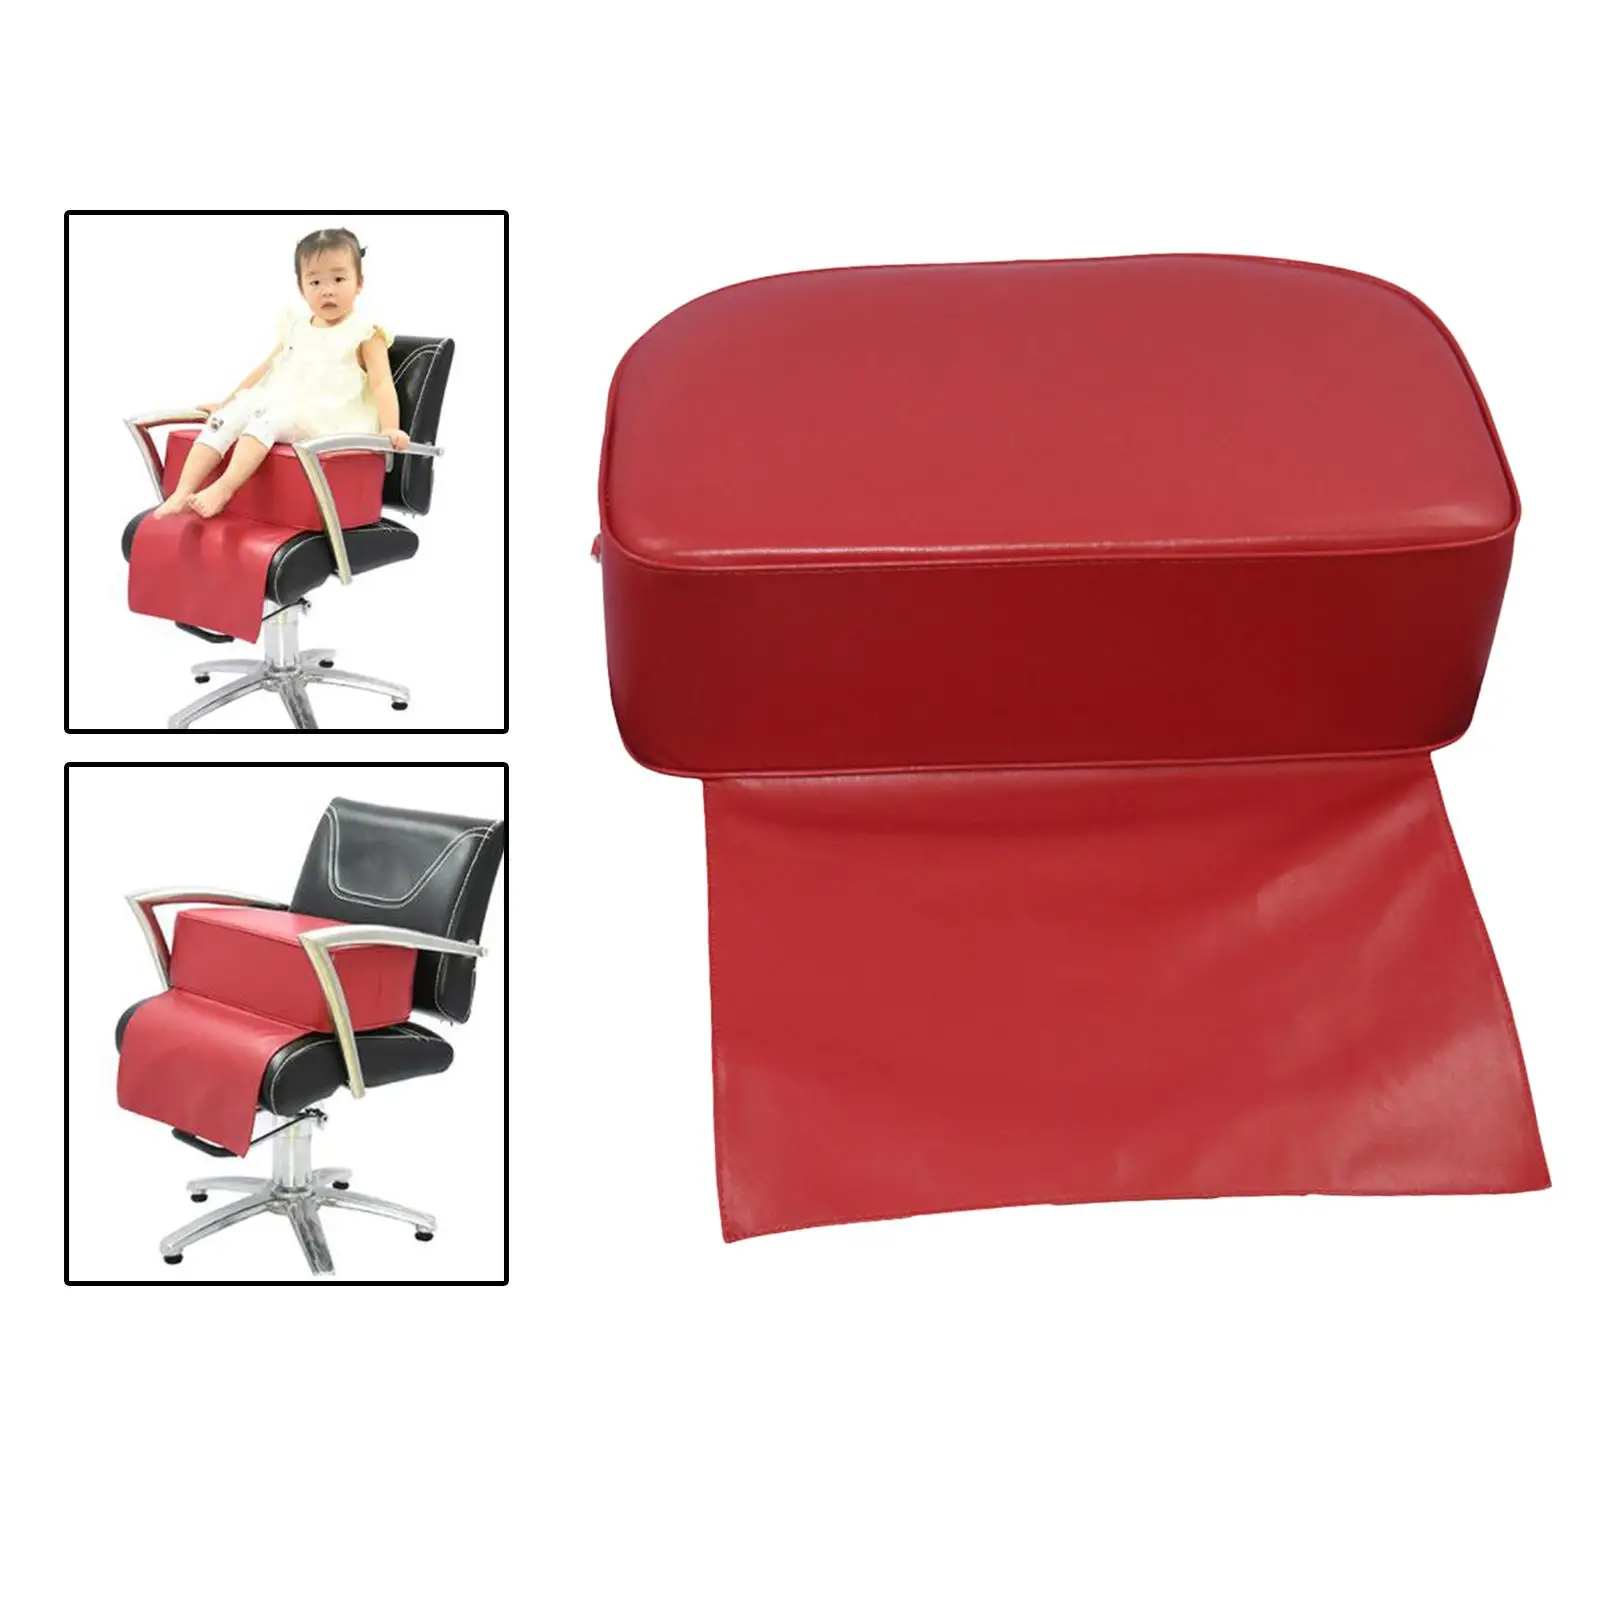 Child Barber Chair Seat Booster Beauty Salon Spa Equipment Cushion, Protecting Your Styling Chair, Comfortable and Durable